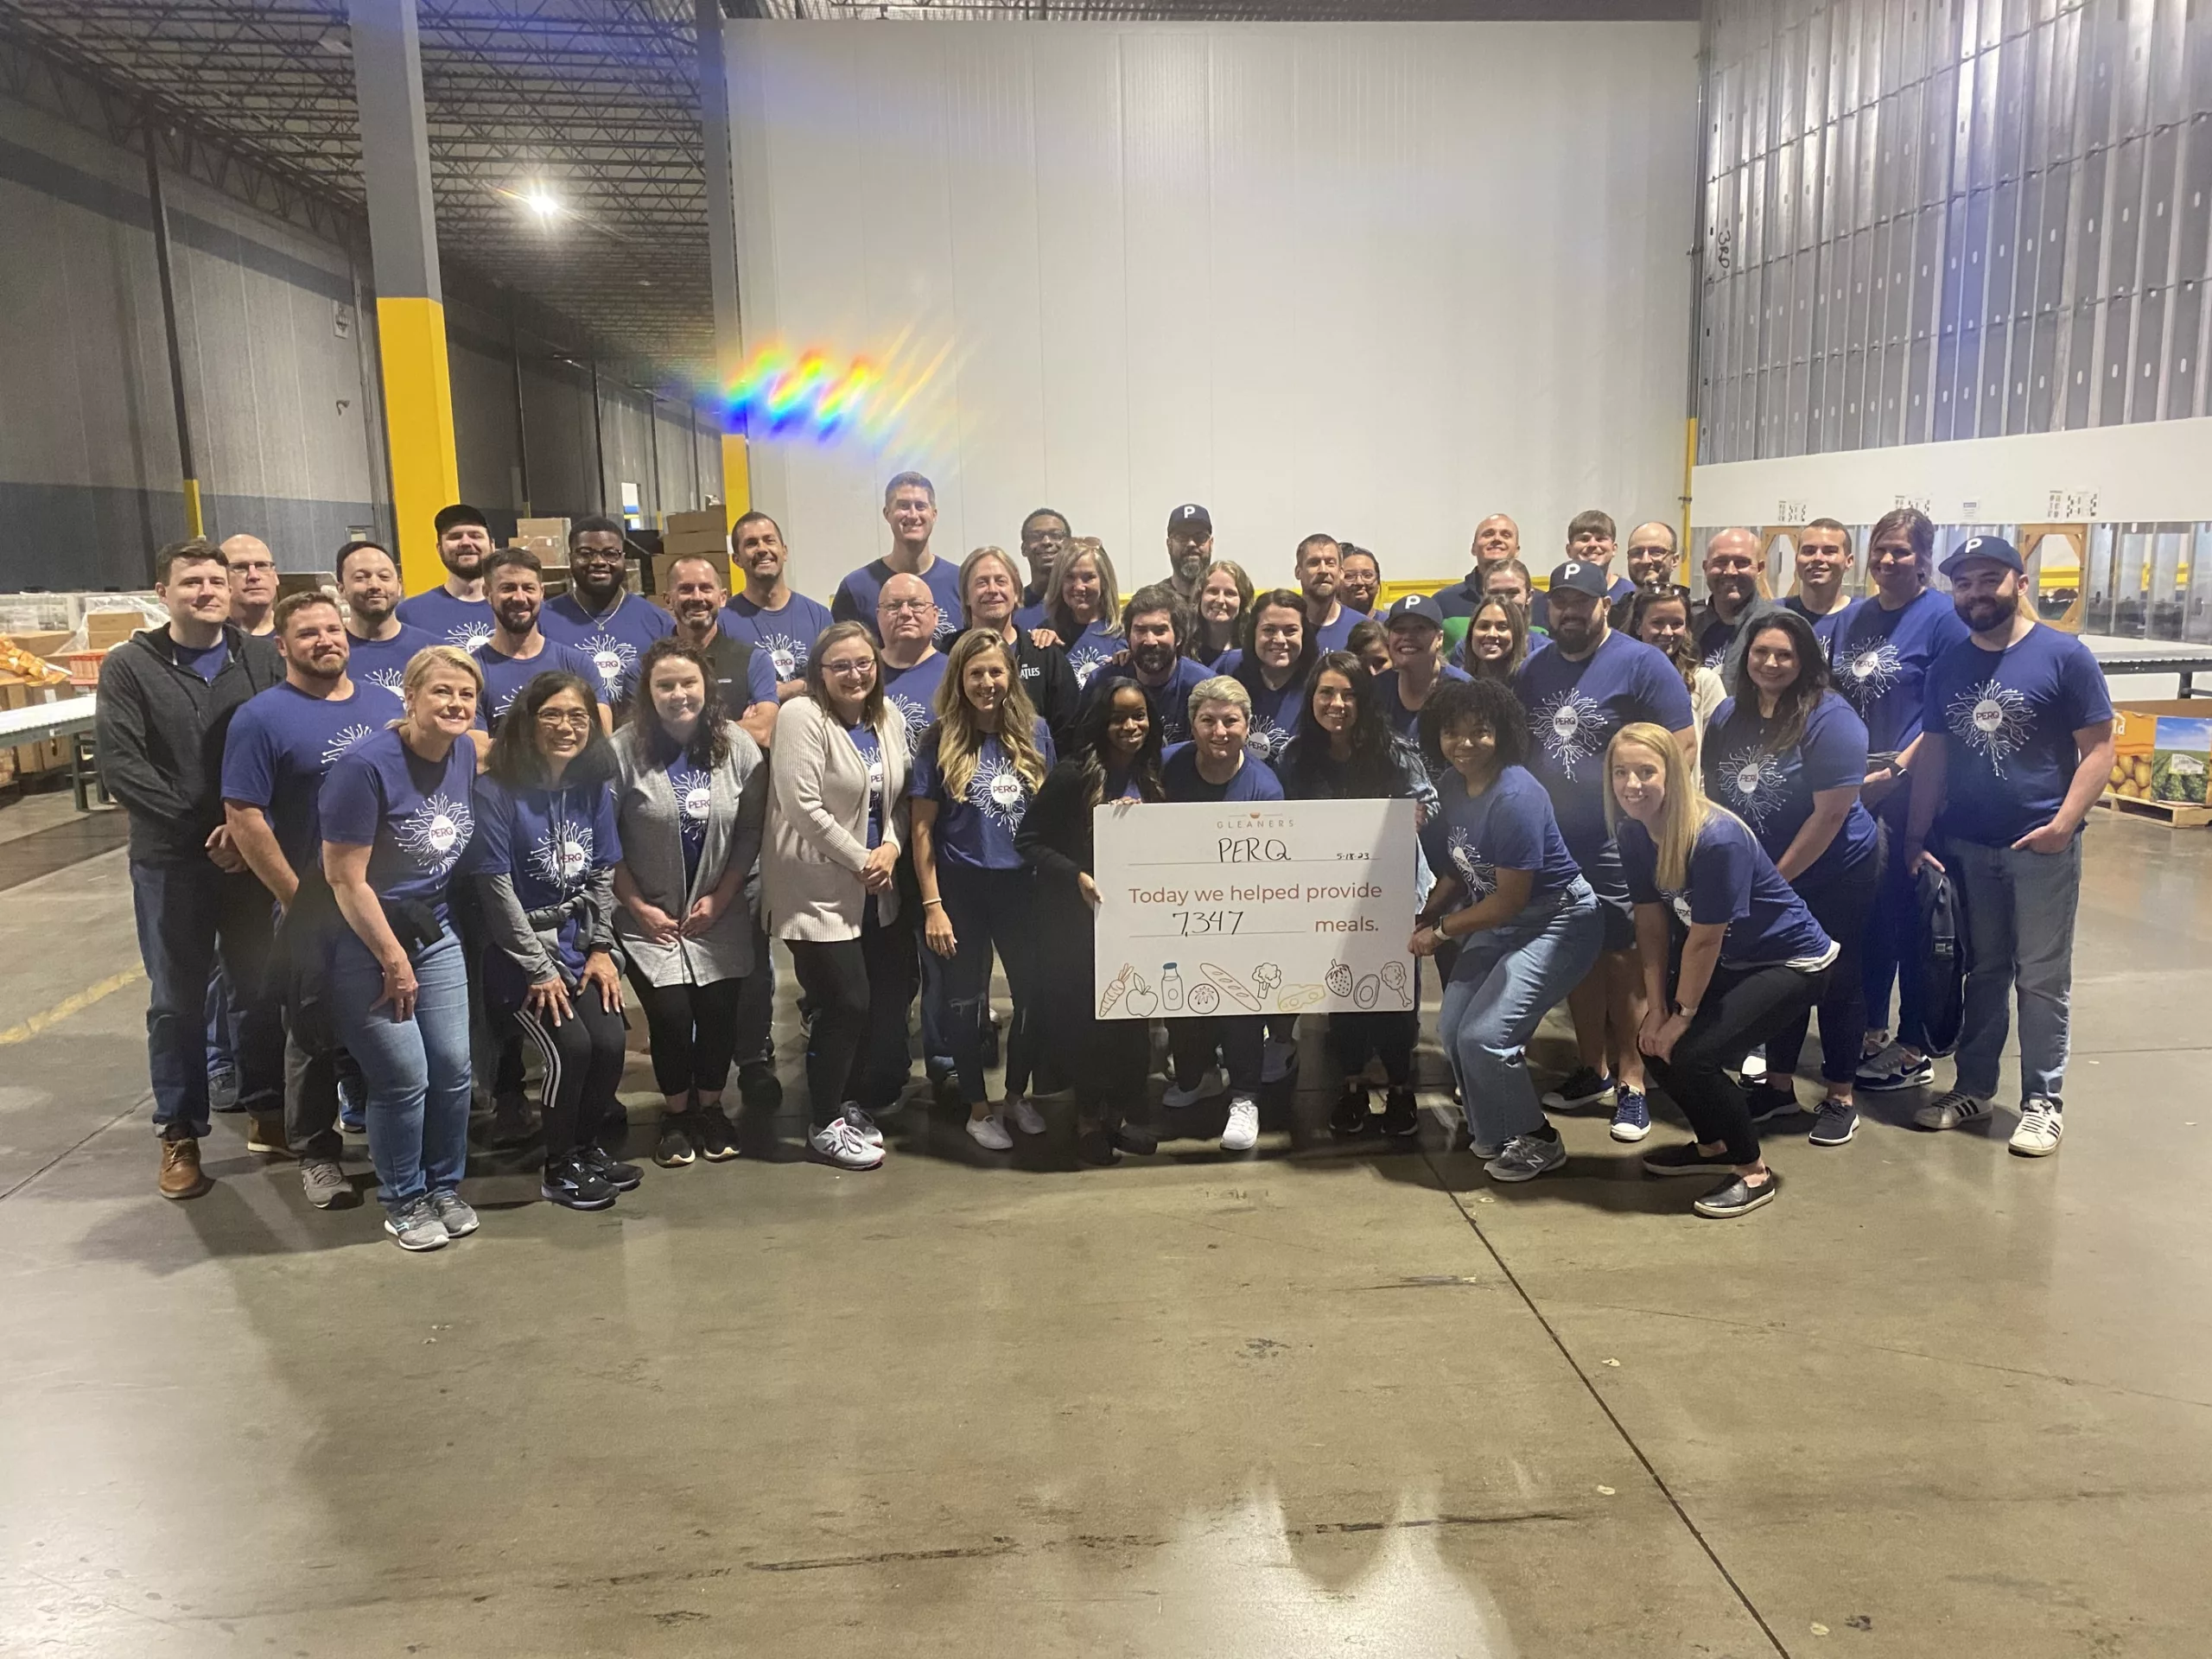 A group picture of the entire PERQ multifamily team volunteering at Gleaner's Food bank holding up a sign showing they provided 7,347 meals.